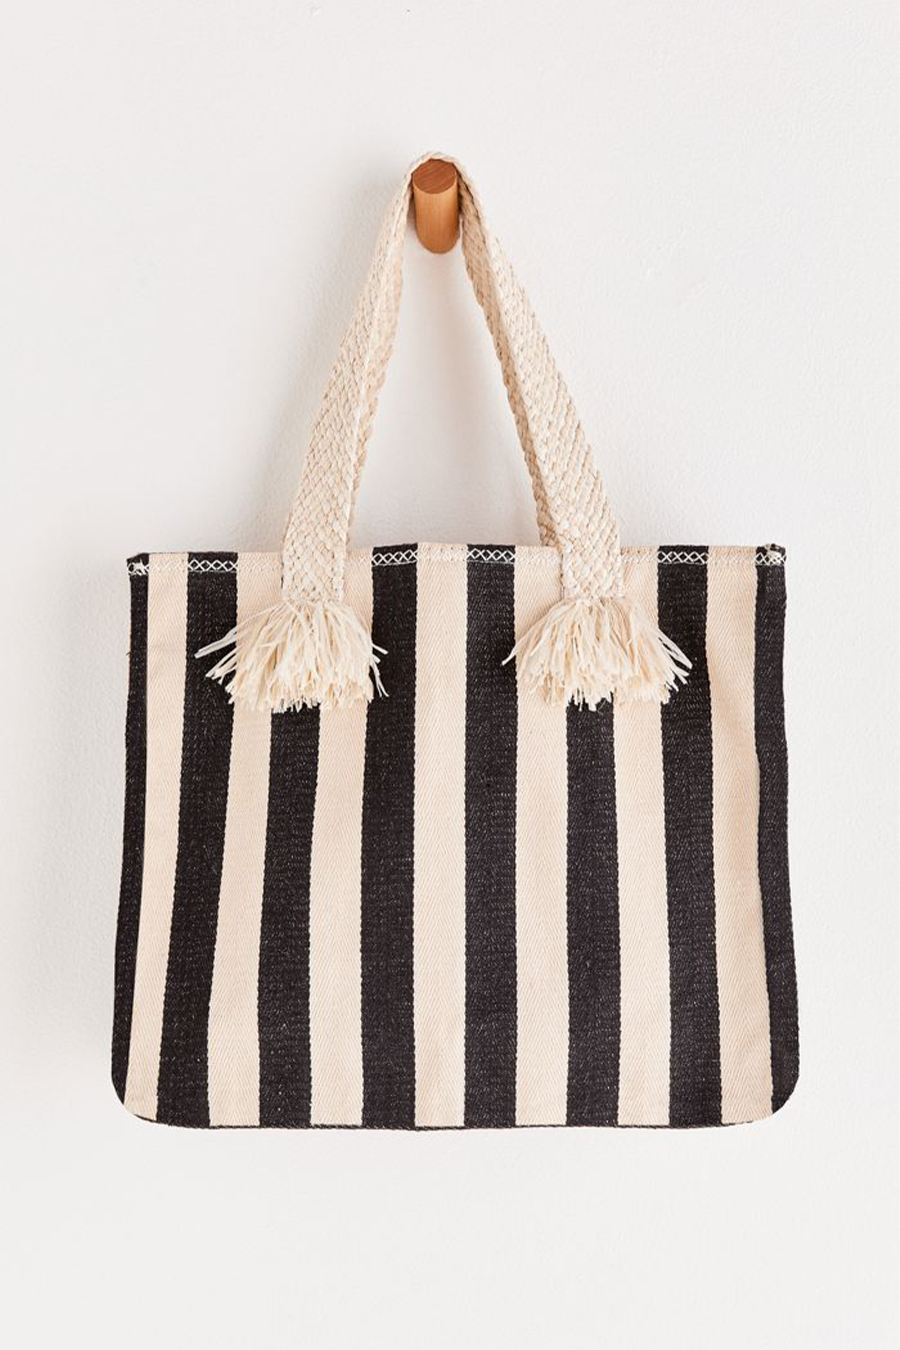 Cabana Rugby Stripe Tote | Black - Main Image Number 1 of 1